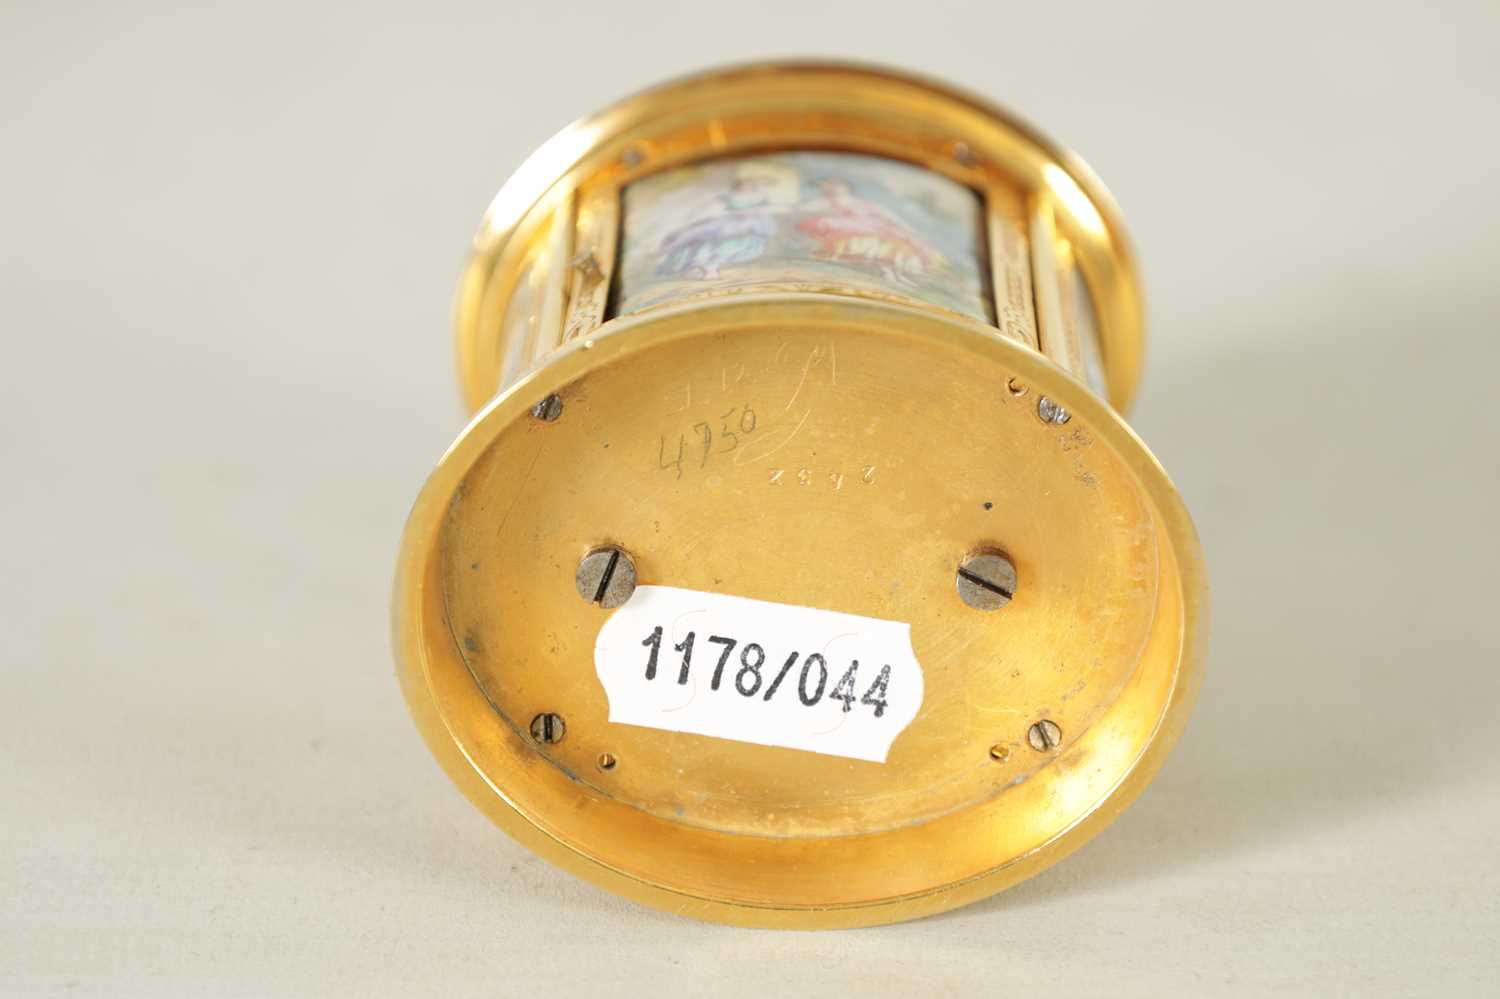 A LATE 19TH CENTURY MINIATURE PORCELAIN PANELLED ENGRAVED OVAL CARRIAGE CLOCK - Image 8 of 8